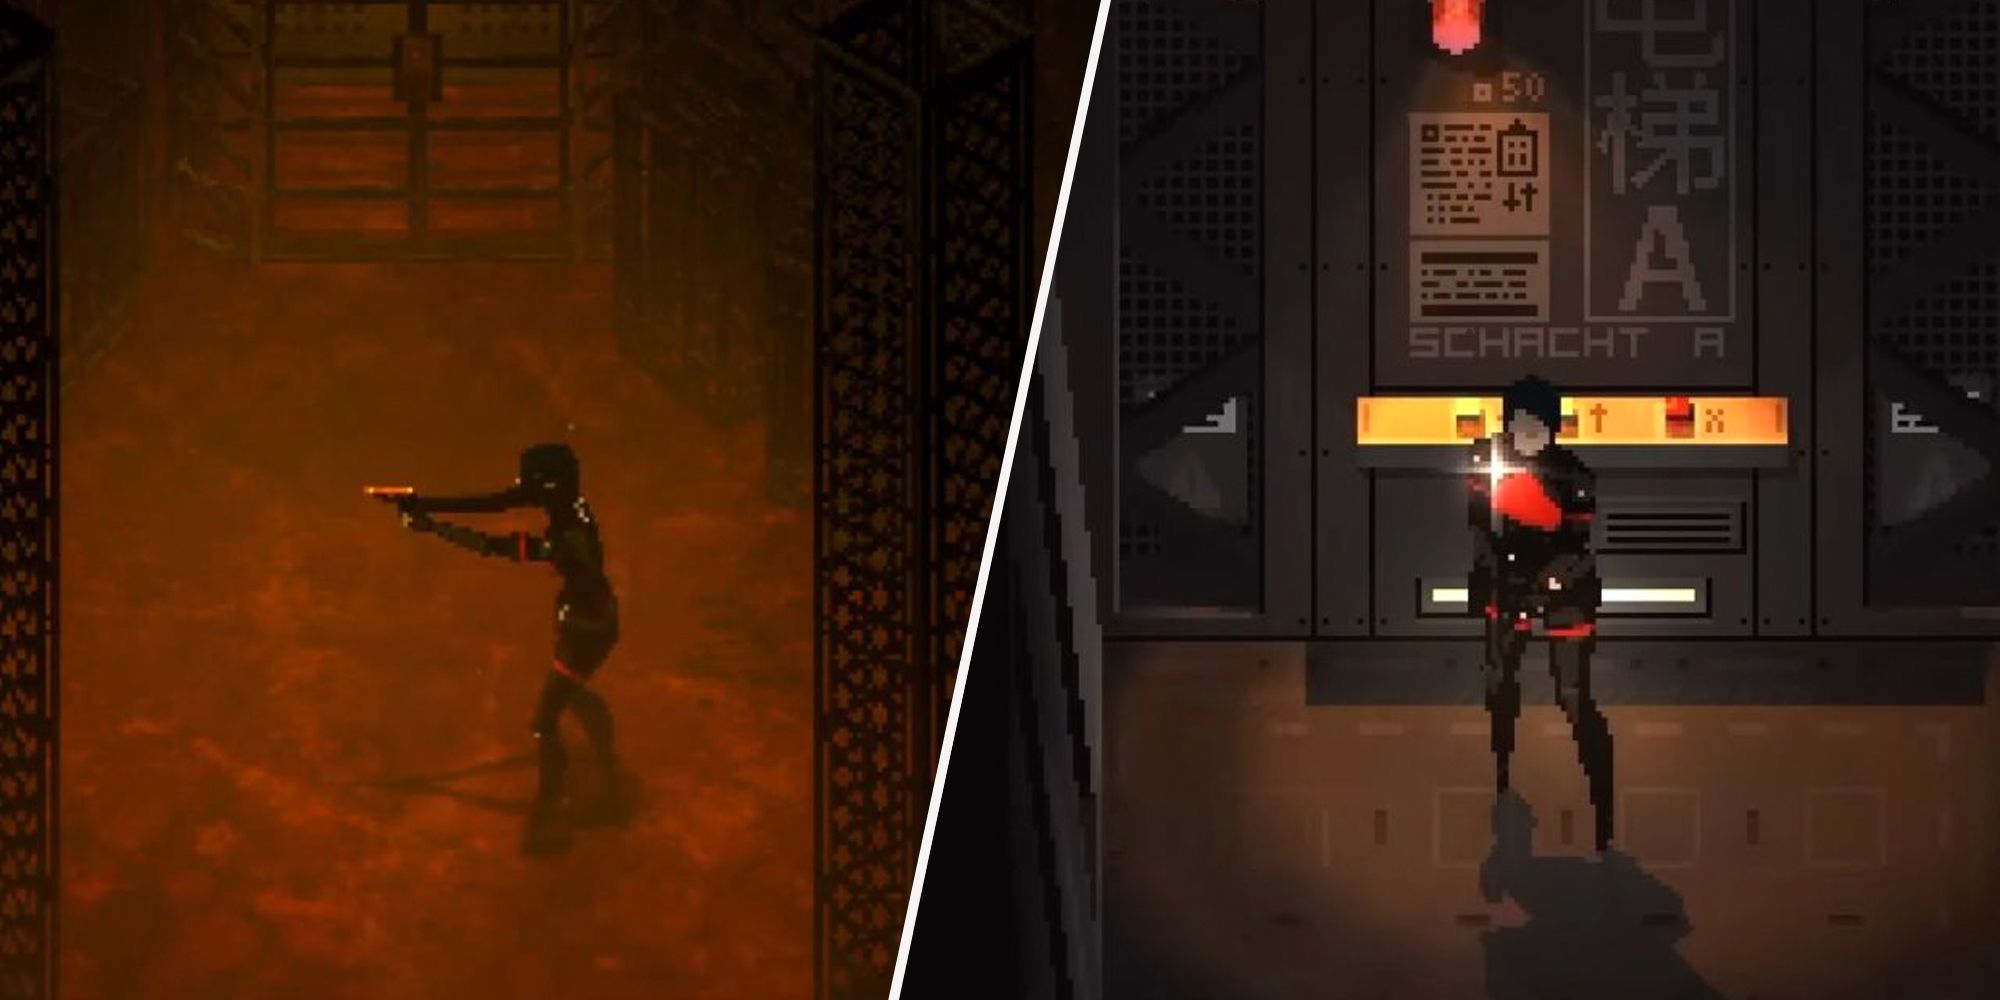 Signalis split image, On the left is Elster in an orange foggy room, she;s aiming her pistol at something out of frame. On the right is Elster riding an elevator, weapon ready in hand.